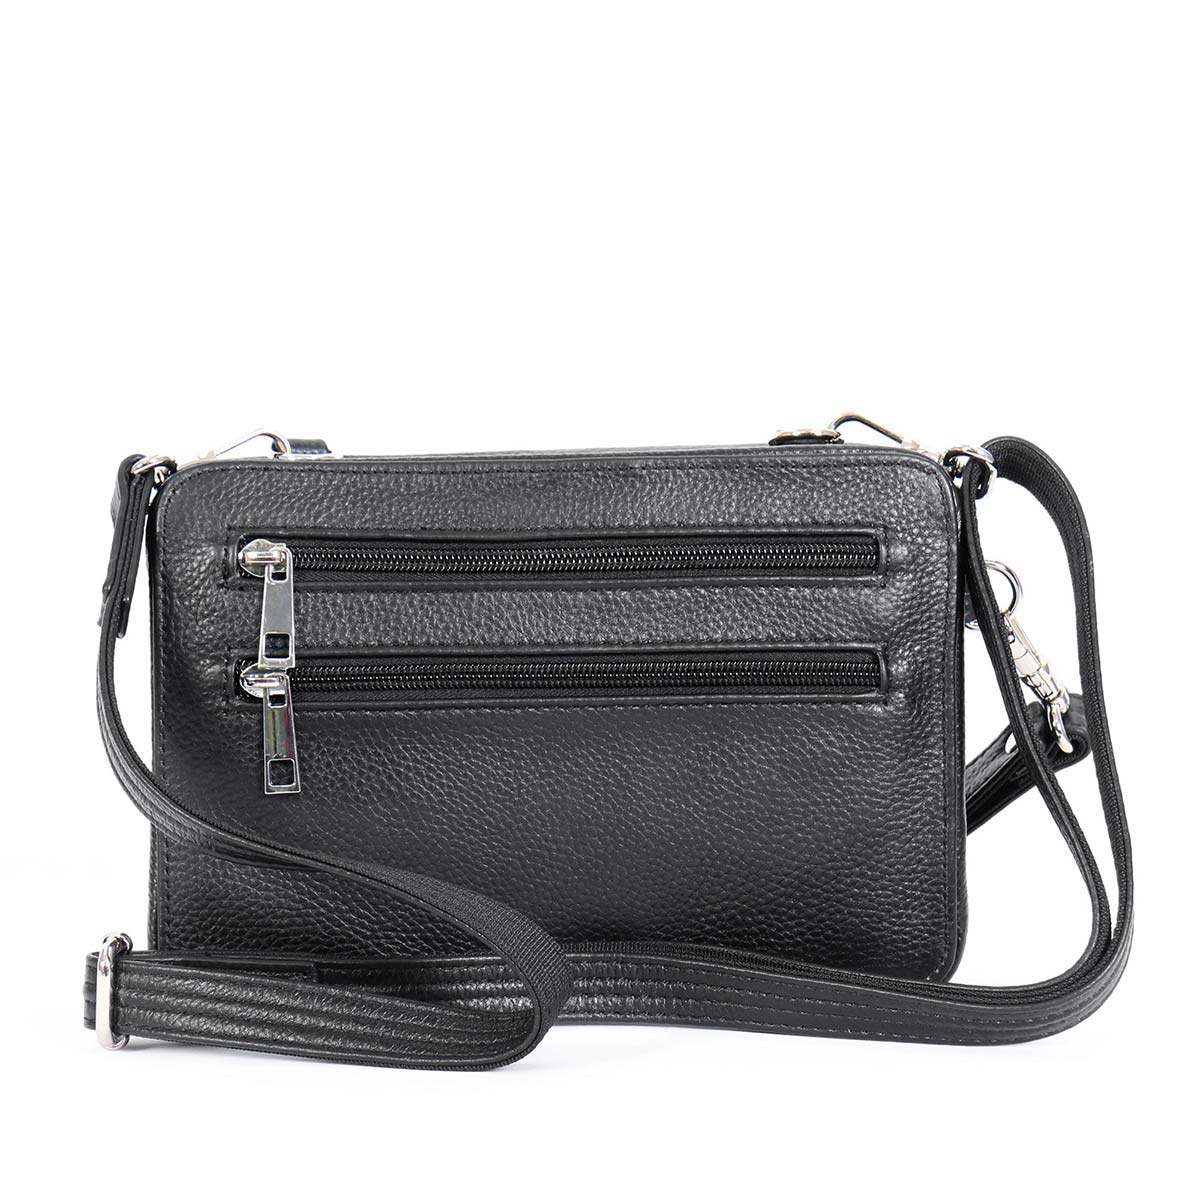 Hot Leathers PUA1175 Black Leather Small Concealment Crossbody Purse